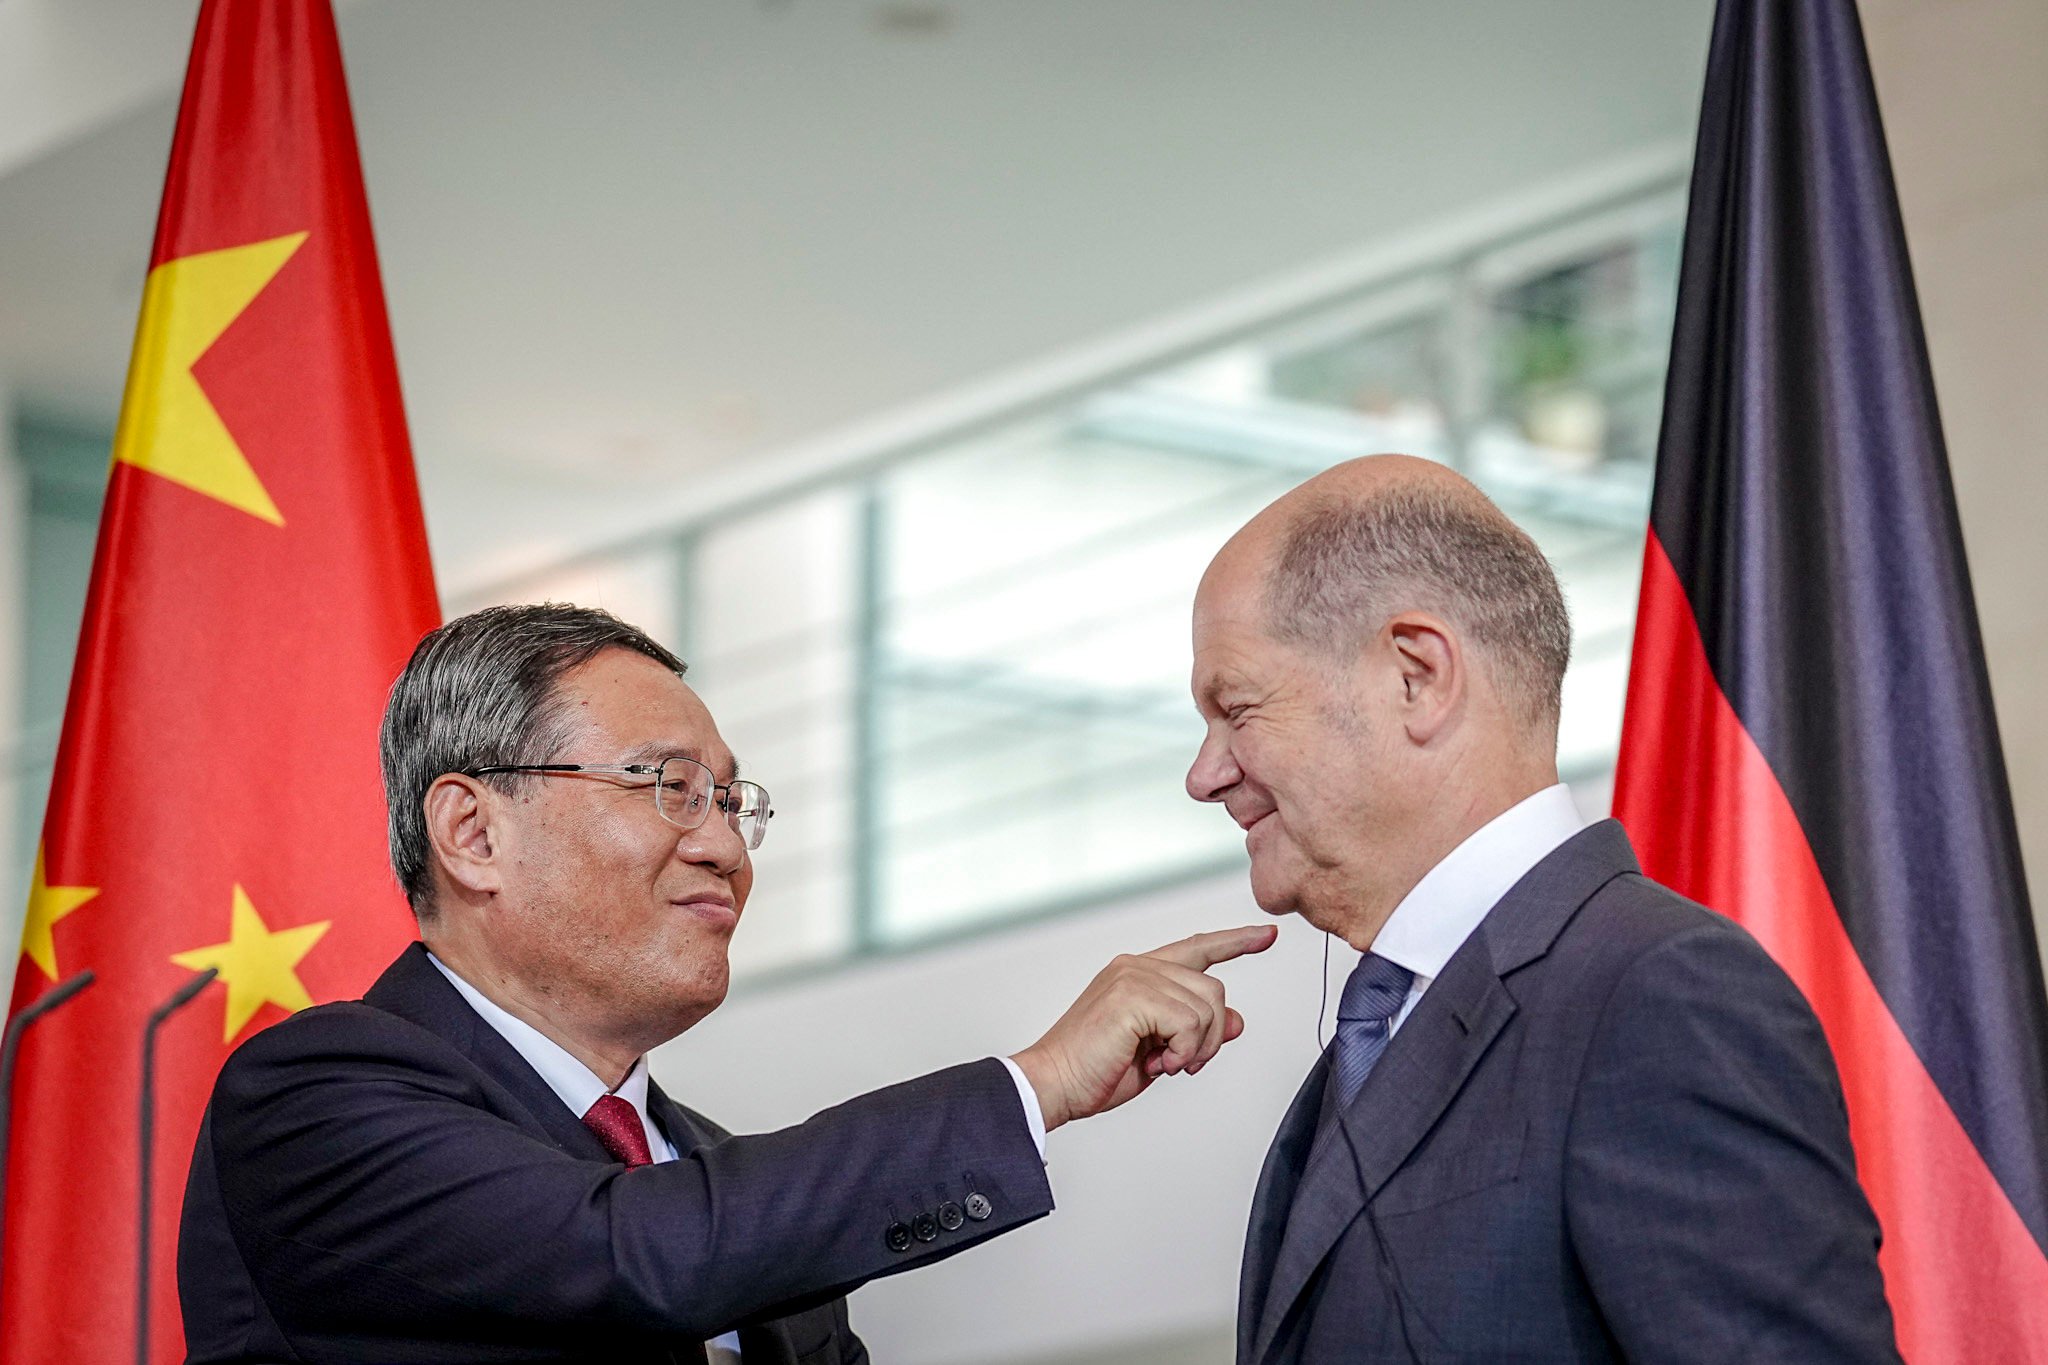 Chinese Premier Li Qiang and German Chancellor Olaf Scholz are seen at a press conference during German-Chinese government consultations, at the Federal Chancellery in Berlin, on June 20. Photo: dpa